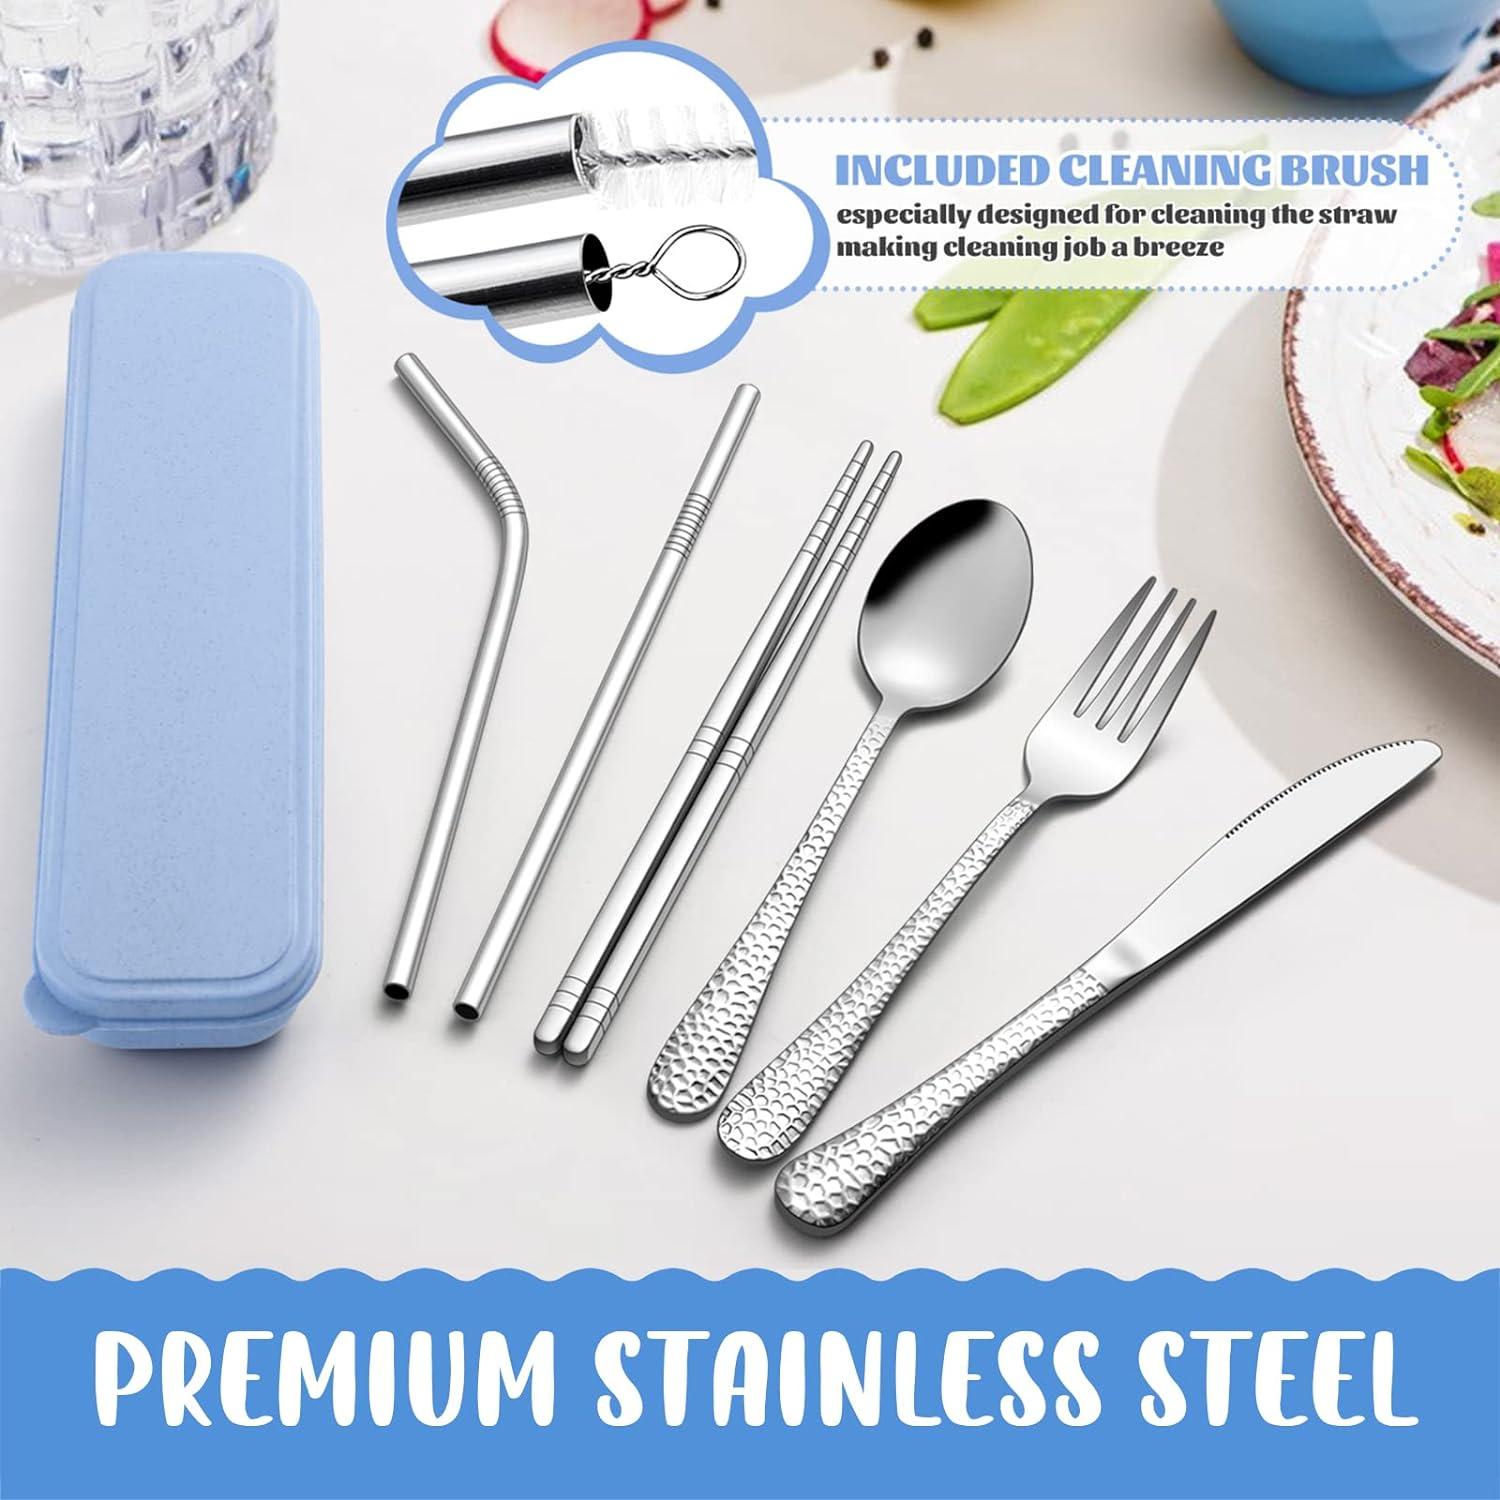 Heavy Duty Silverware Set for 12, E-far 60-Piece Stainless Steel Flatware  Cutlery Set, Heavy Weight Metal Tableware Eating Utensils for Home